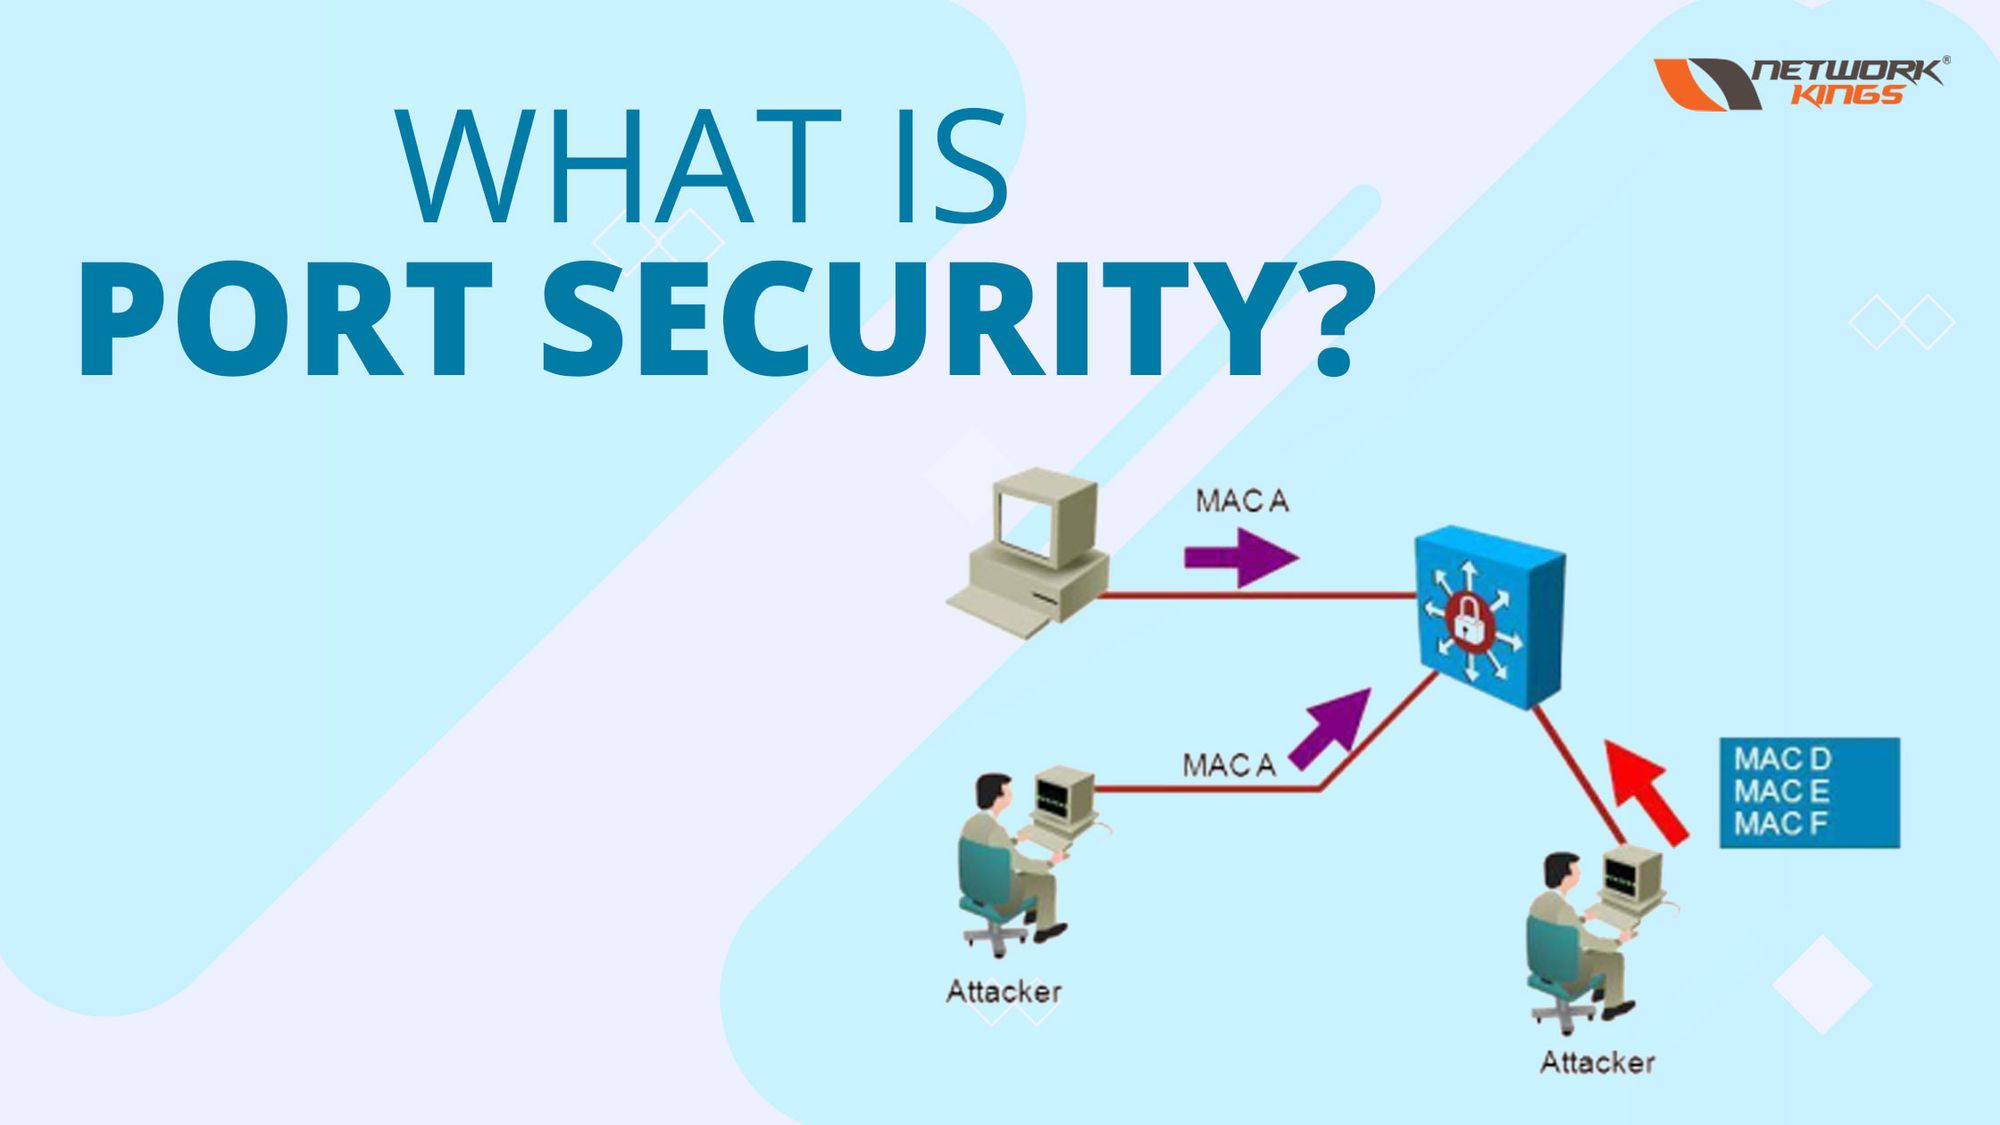 What is Port Security?